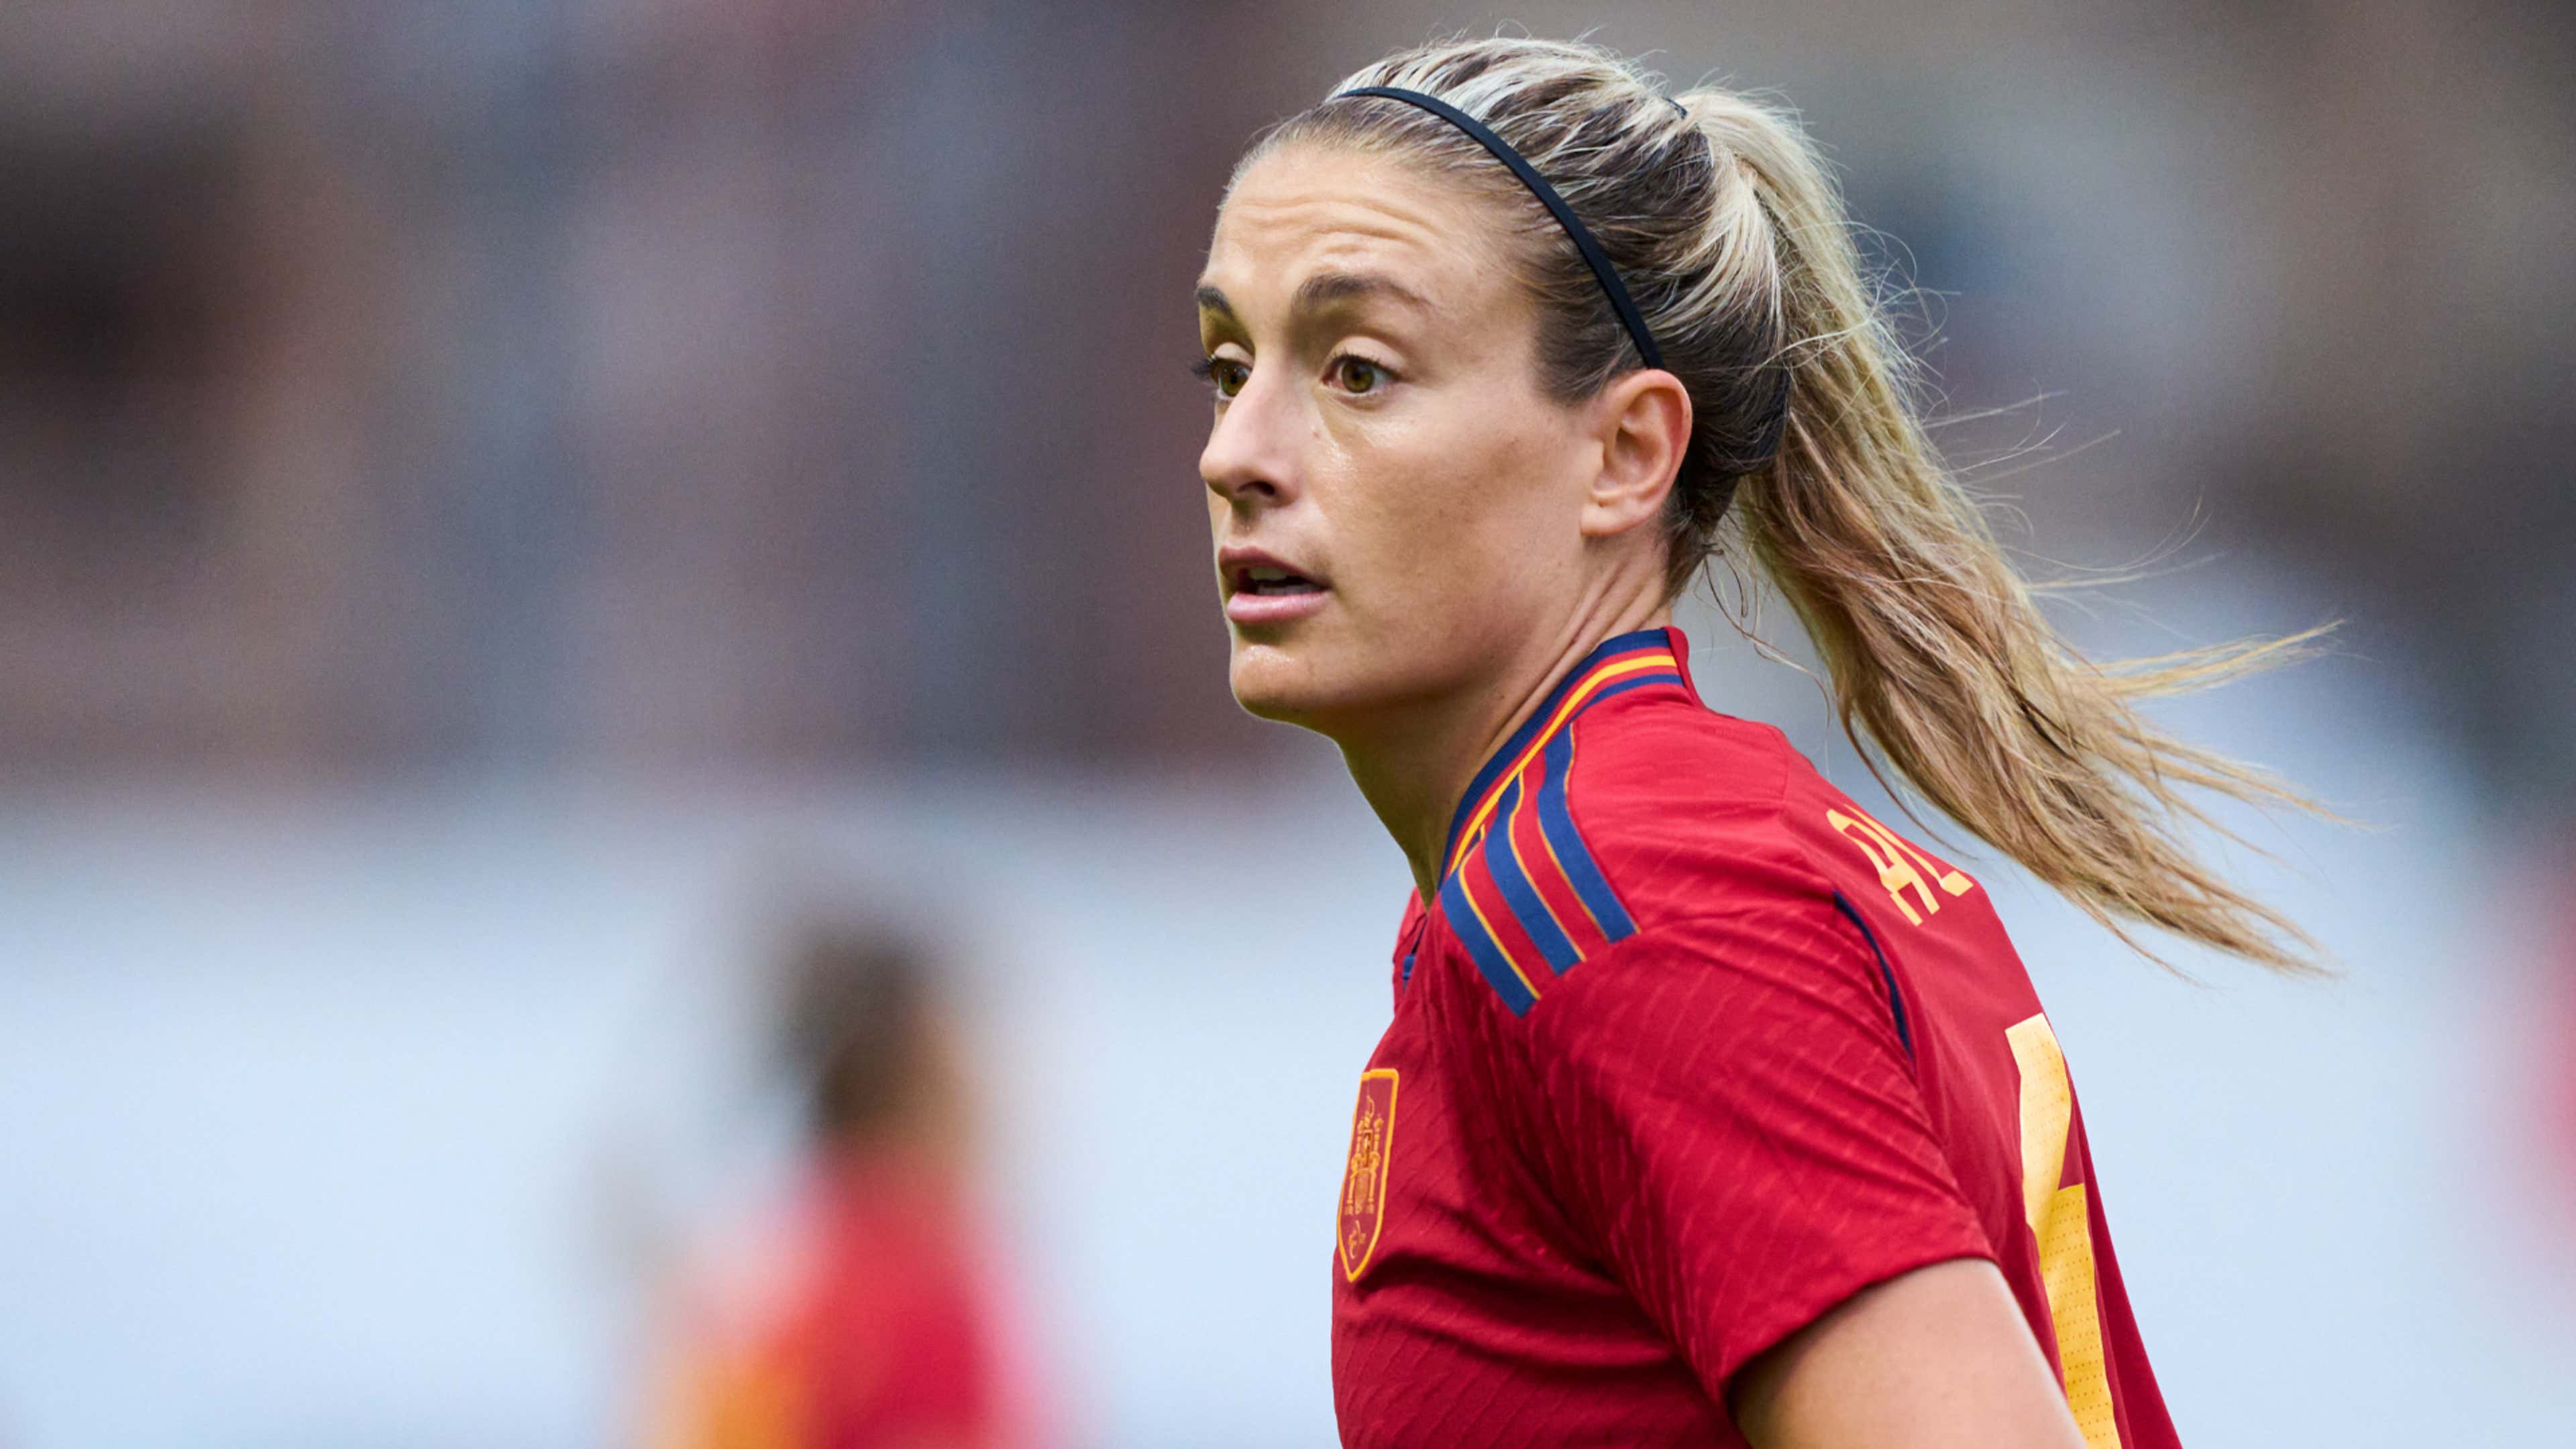 WATCH: Ballon d'Or winner Alexia Putellas scores stunning Spain goal almost exactly 12 months after devastating ACL injury | Goal.com US